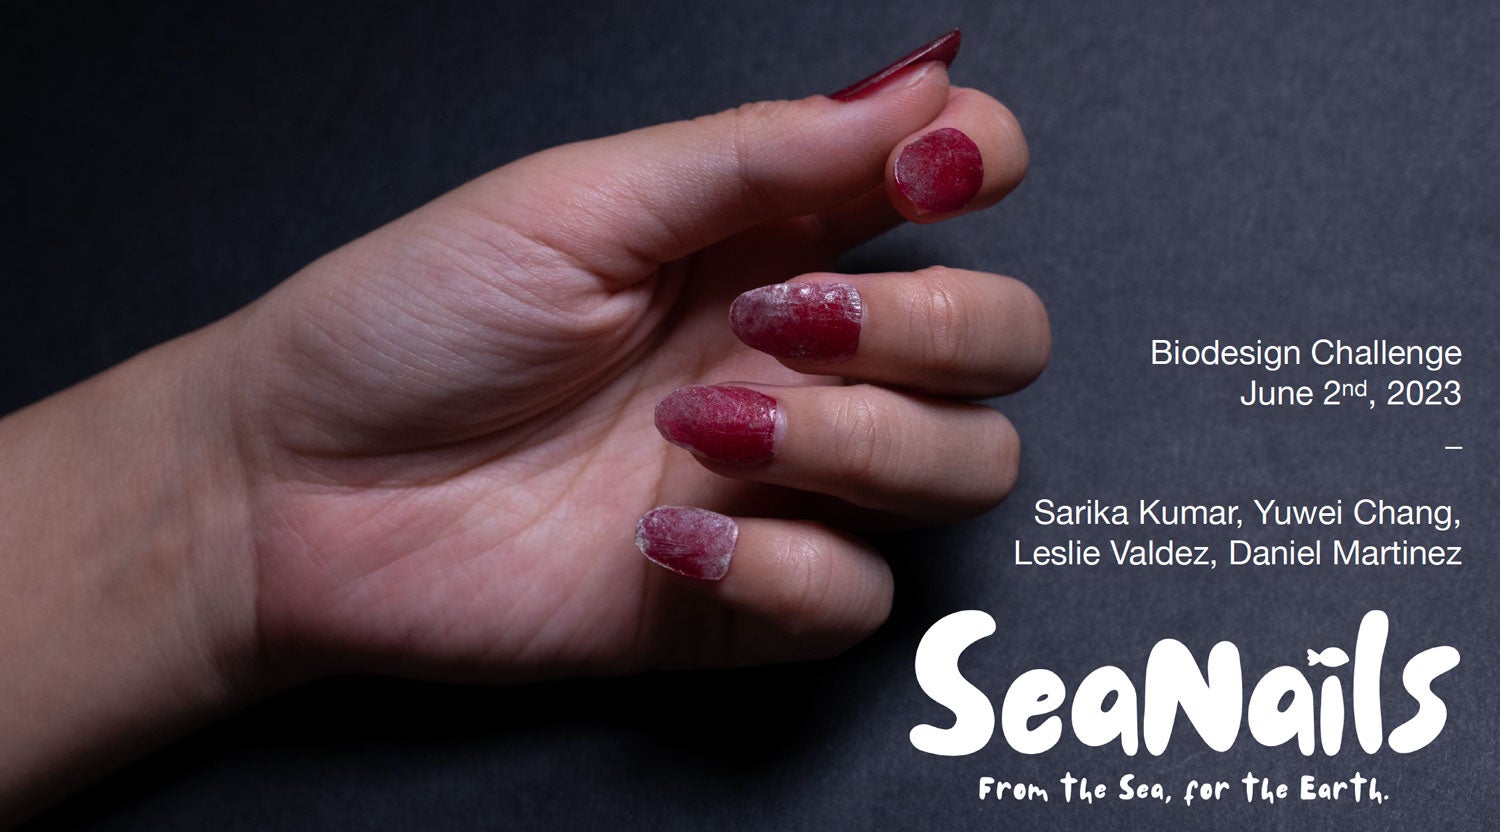 Poster showing prototype of a natural nail called "SeaNails"